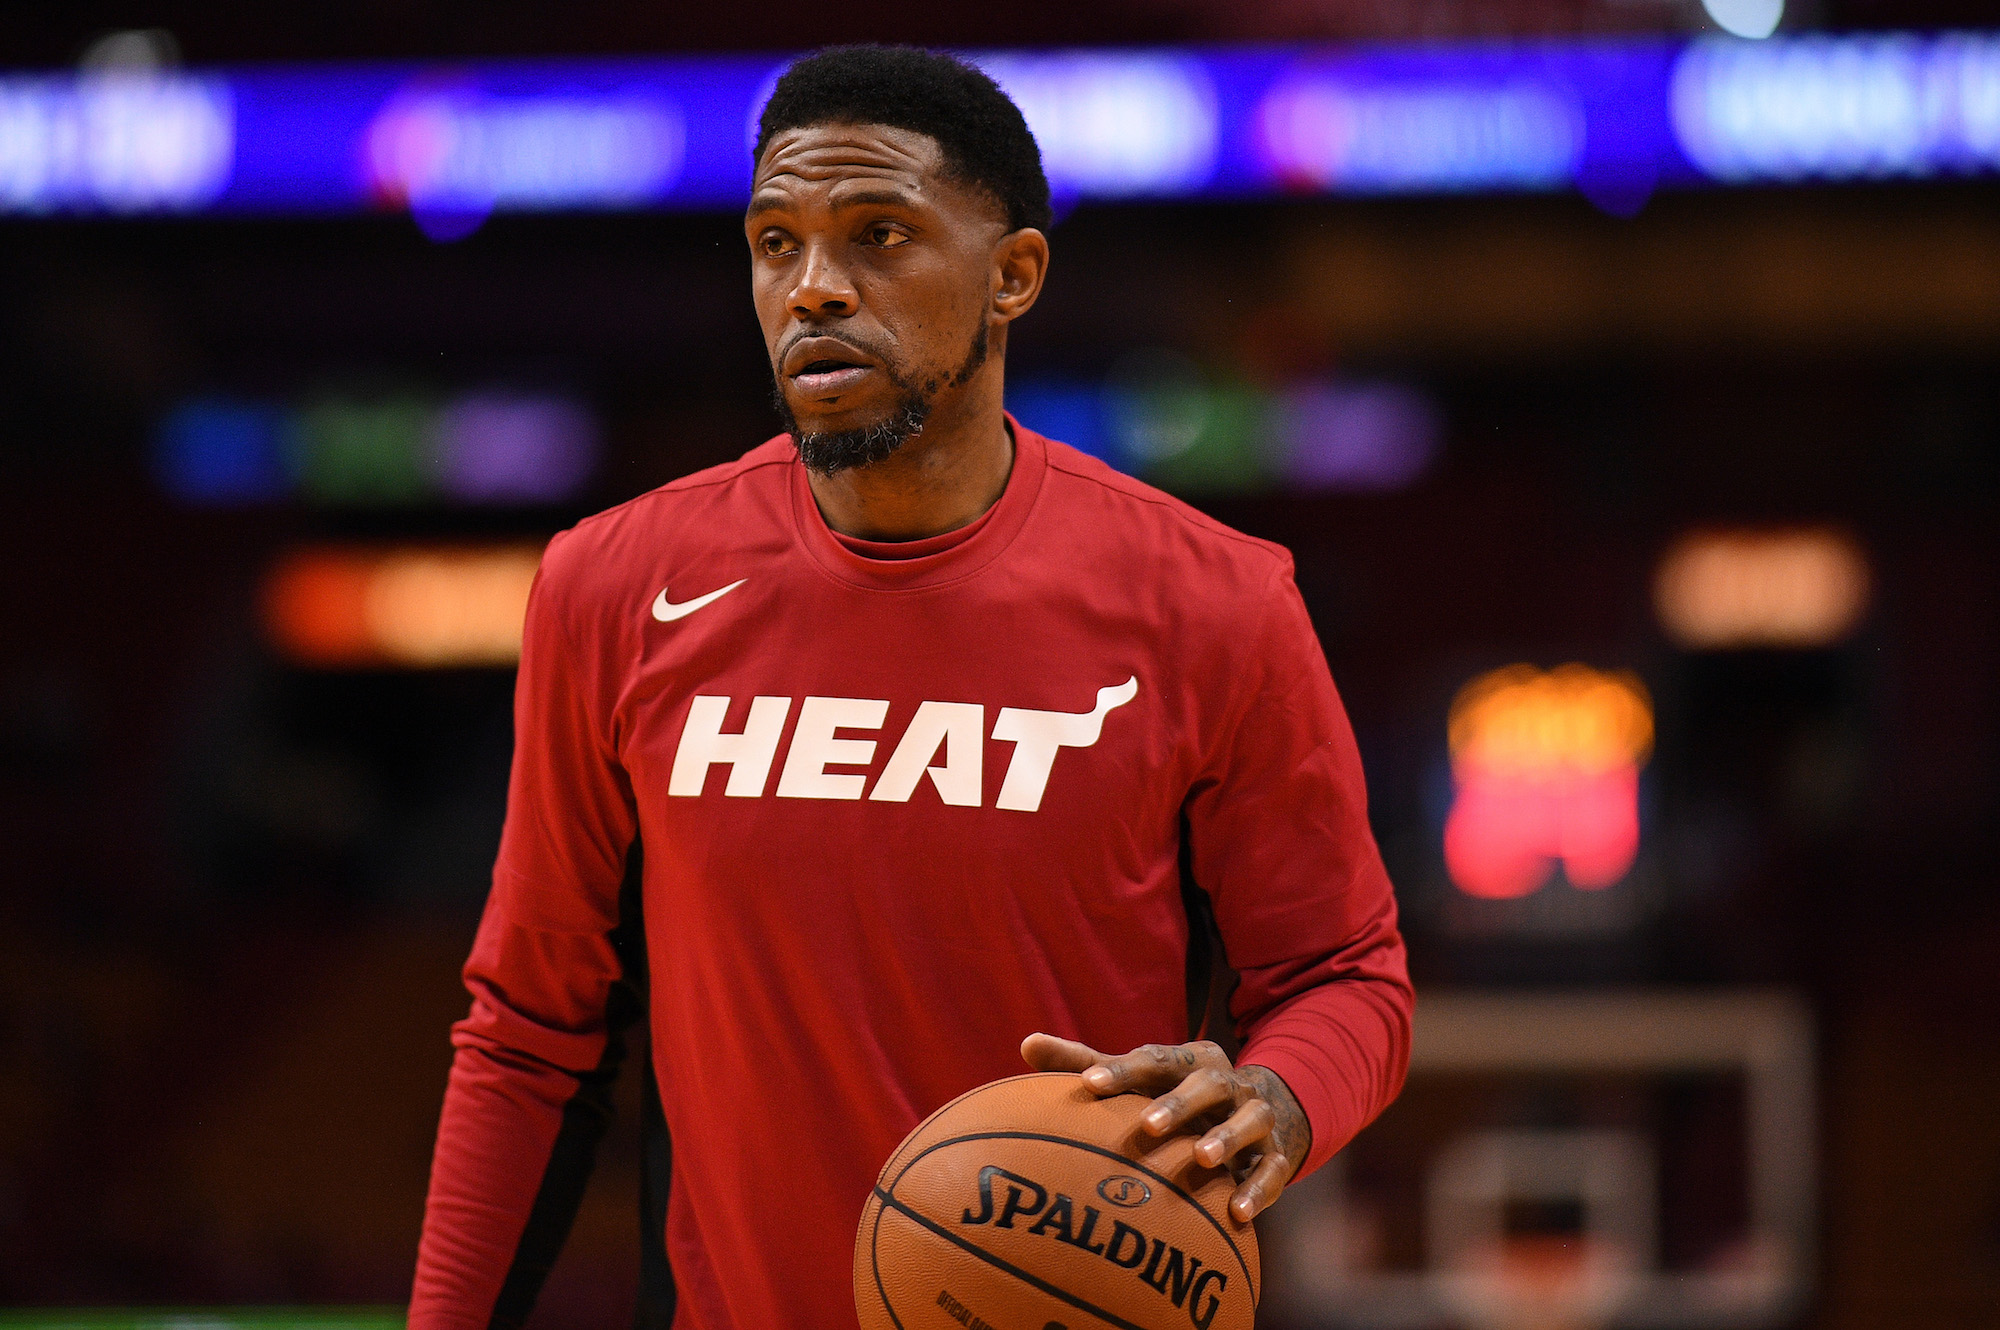 Udonis Haslem has used grit and hard work to earn more than $60 million in the NBA.